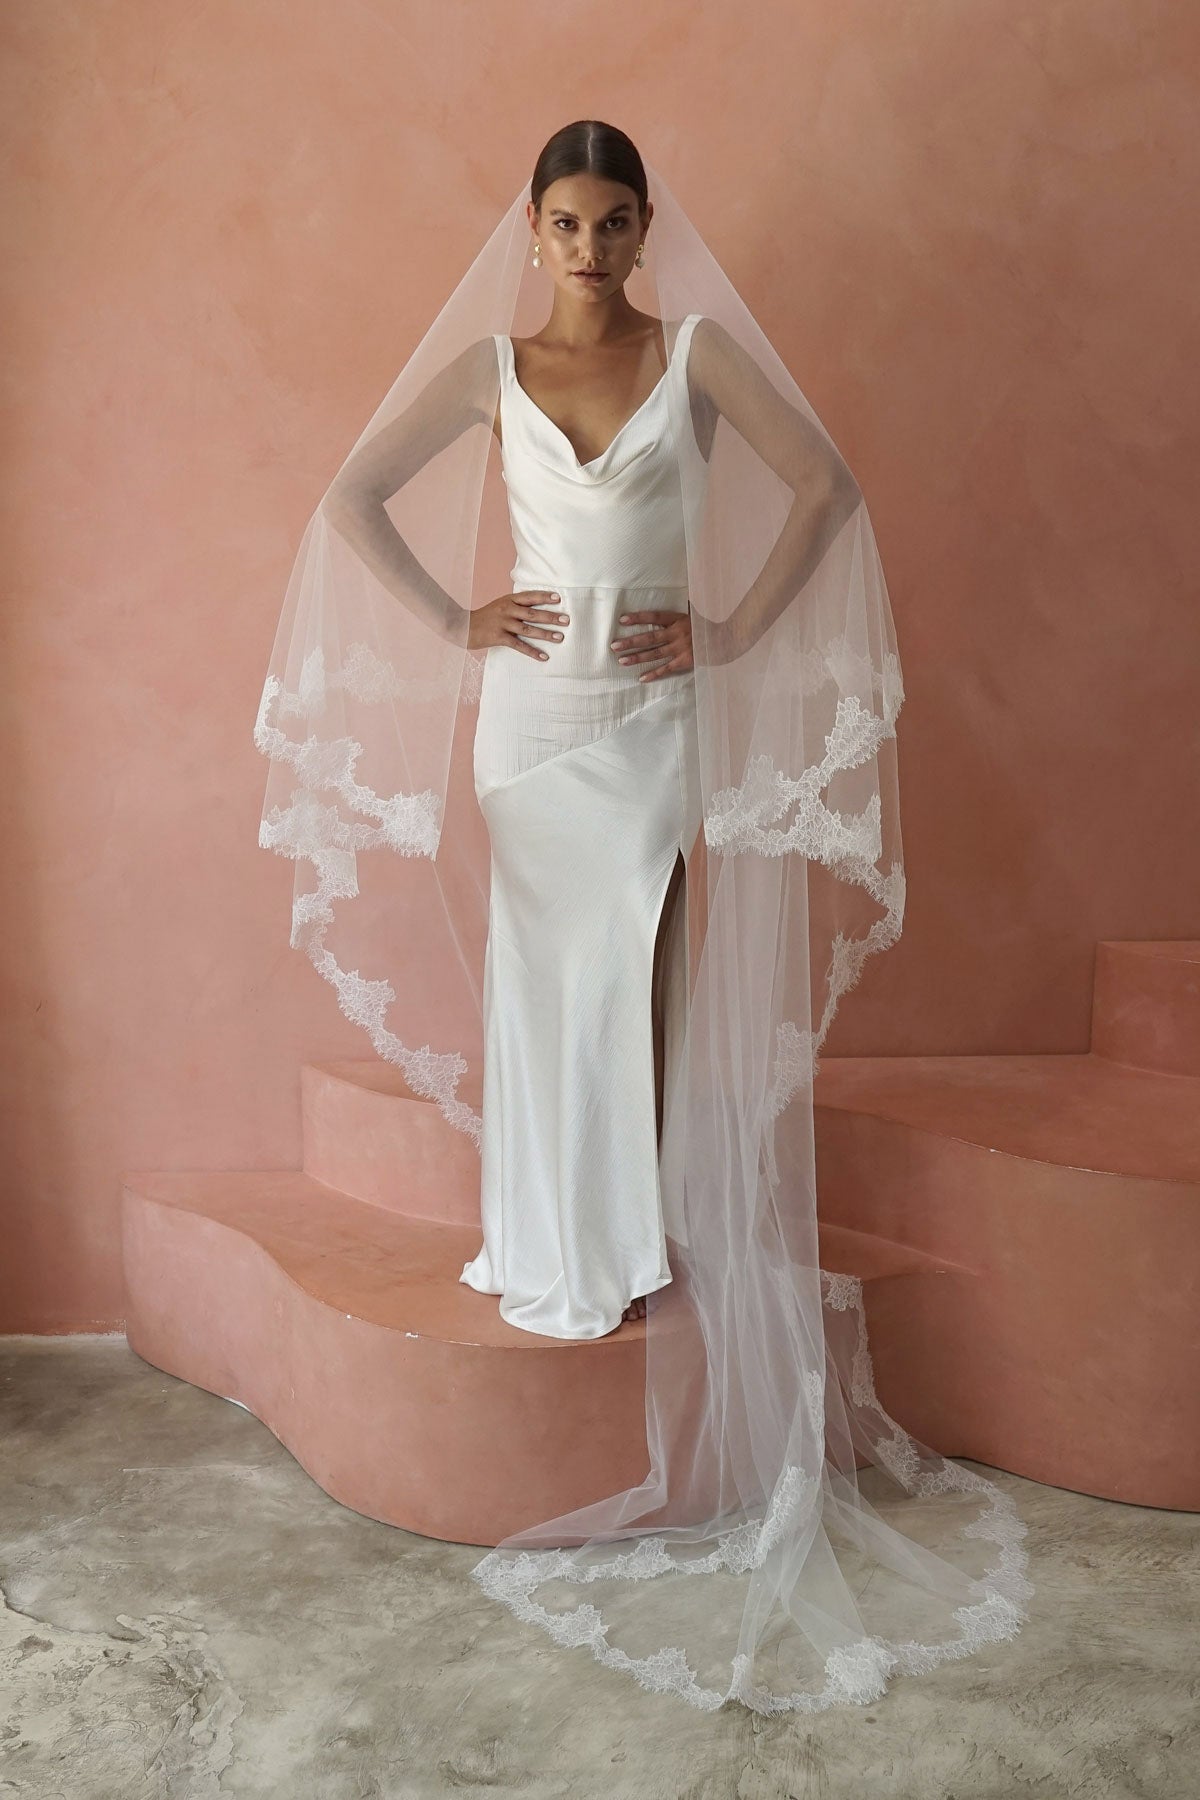 A model wearing CELINE II, a two tier lace wedding veil by Madame Tulle